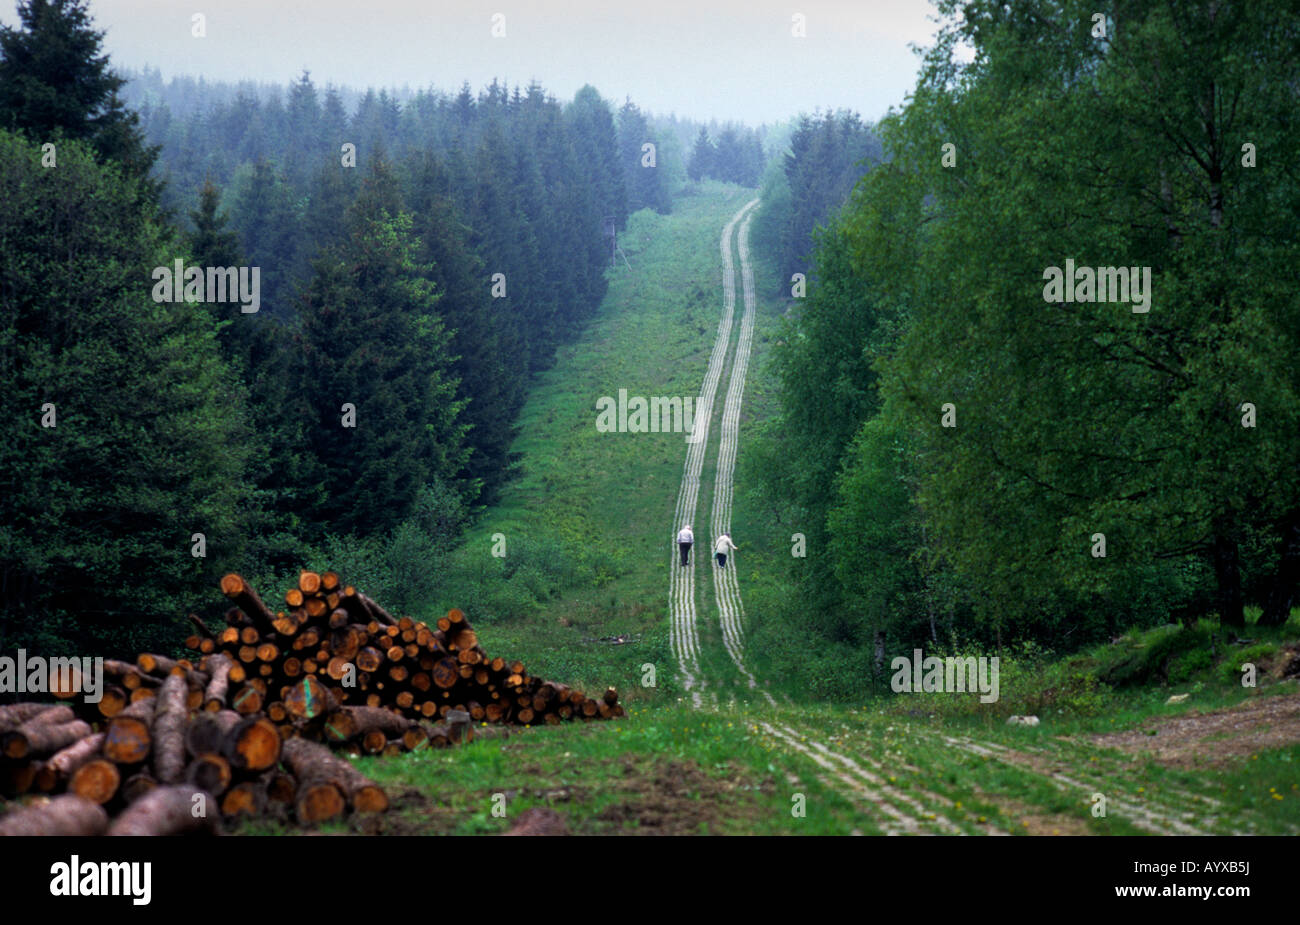 GERMANY DDR BORDER TANK TRACKS WALKING EXERCISE FOREST RELAXATION HARZ MOUNTAINS Stock Photo